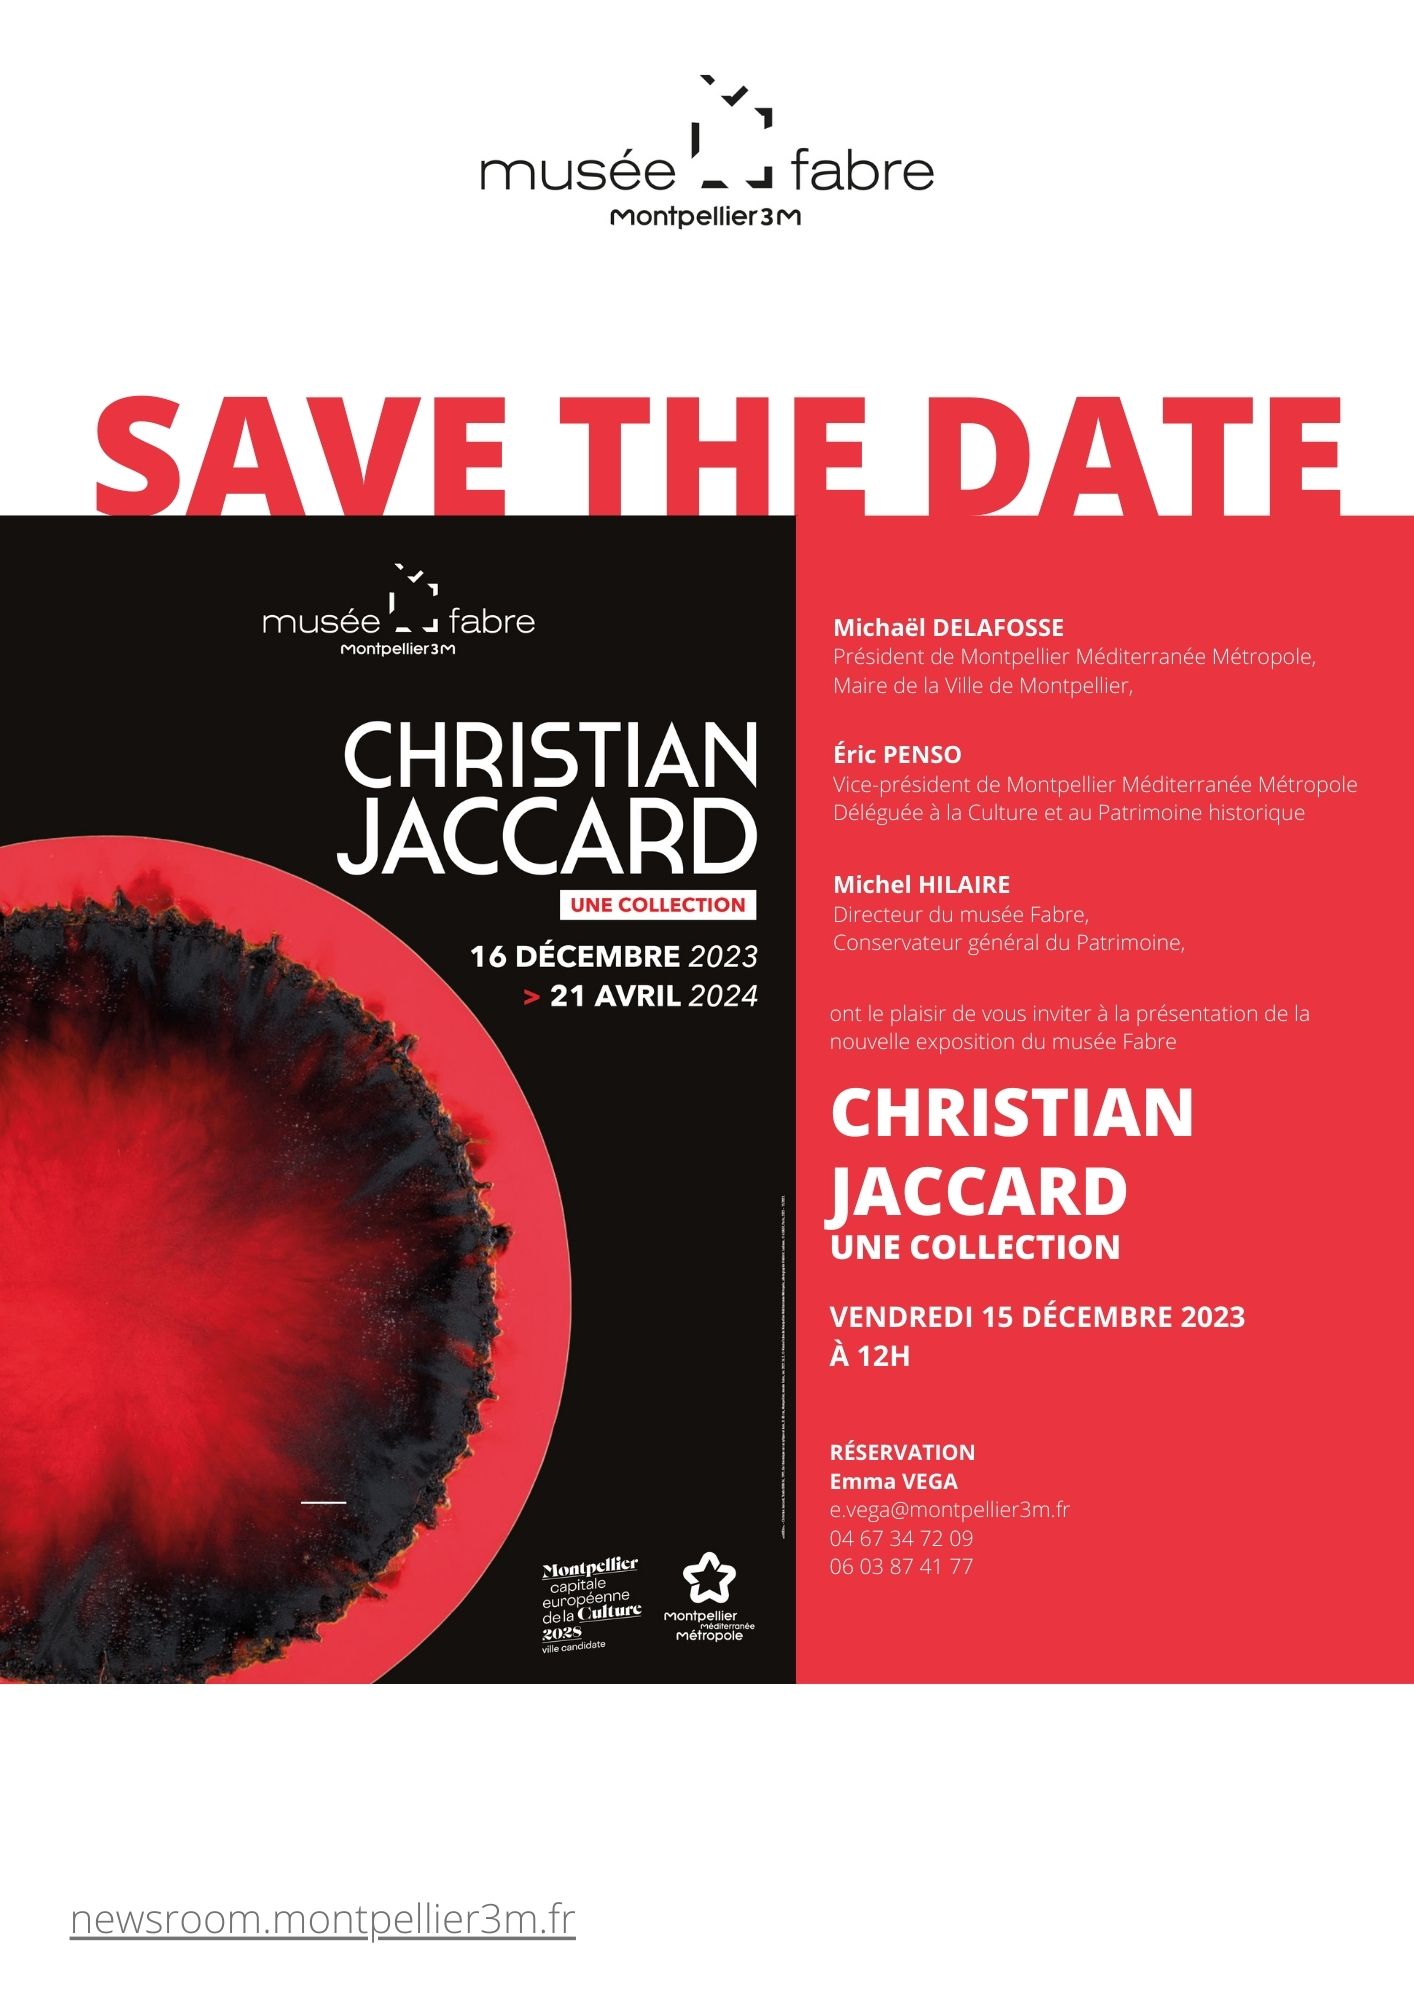 SAVE THE DATE MUSEE FABRE JACCARD.jpg